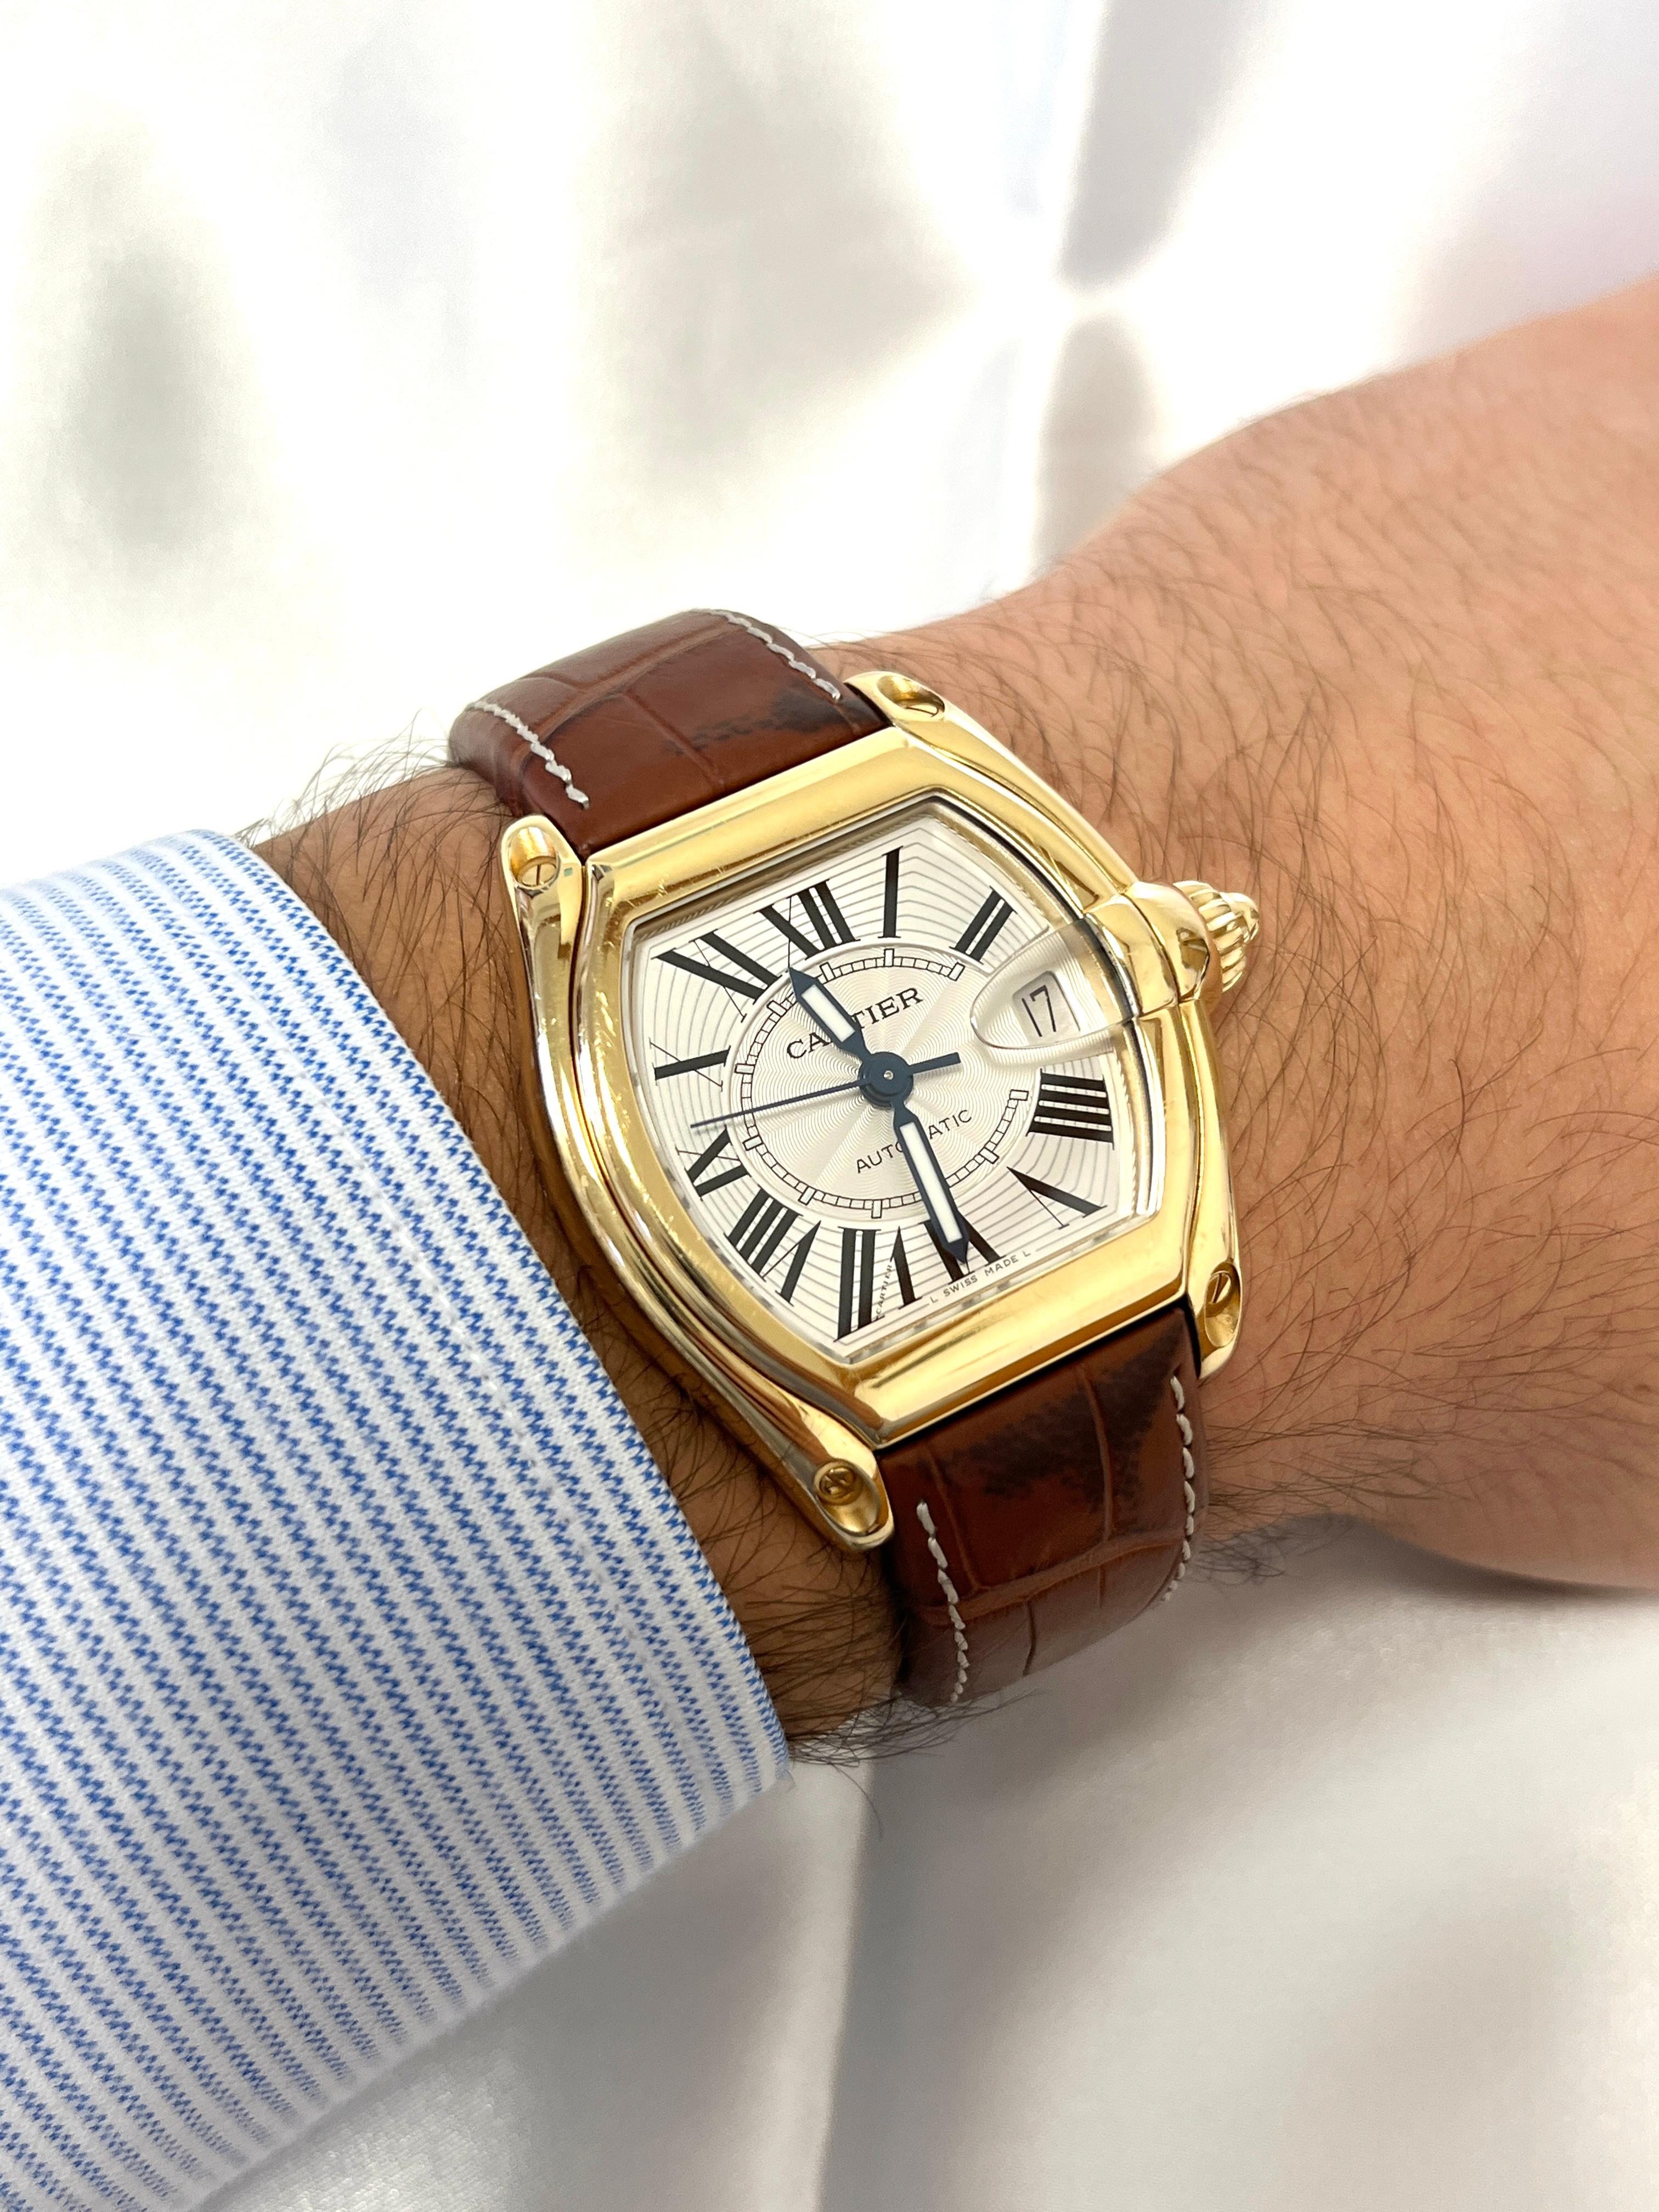 Cartier Roadster 2524 Men's Watch in 18K Gold with Leather Strap Box and Papers 2